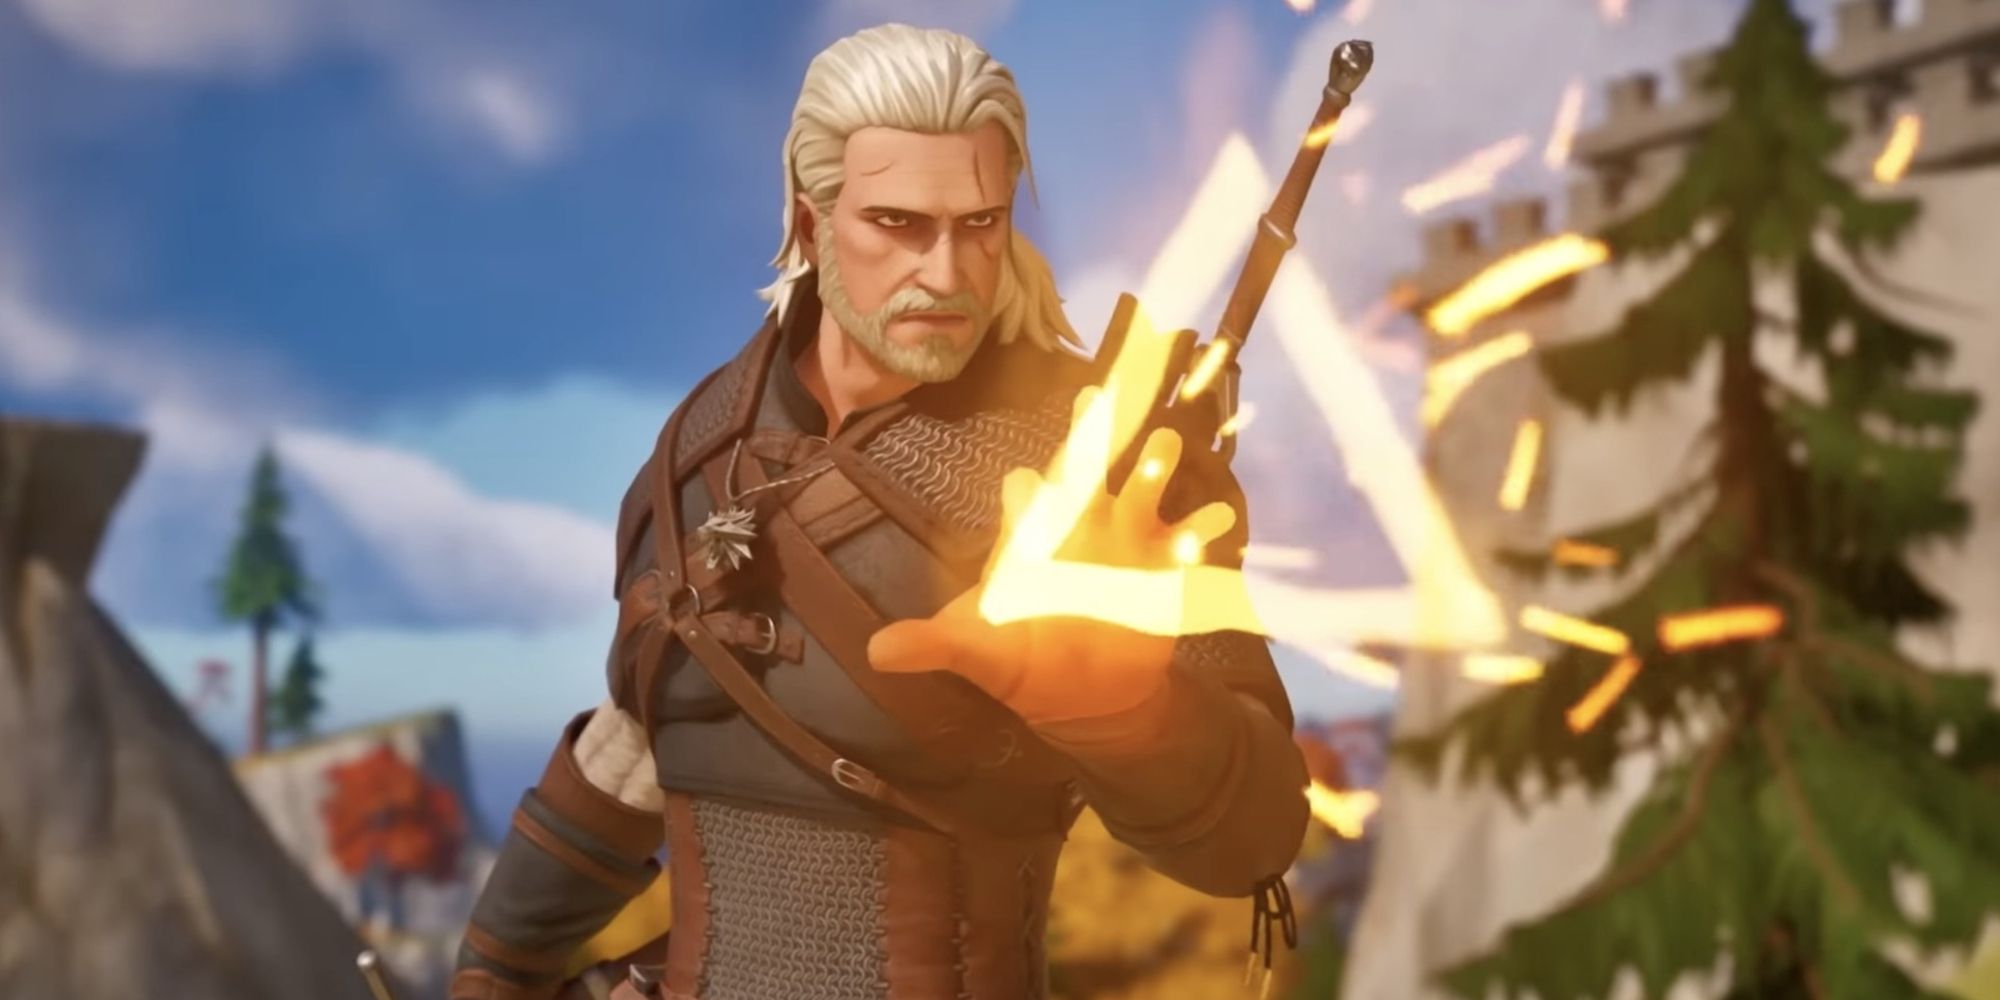 Geralt casts a spell in Fortnite's Witcher Crossover